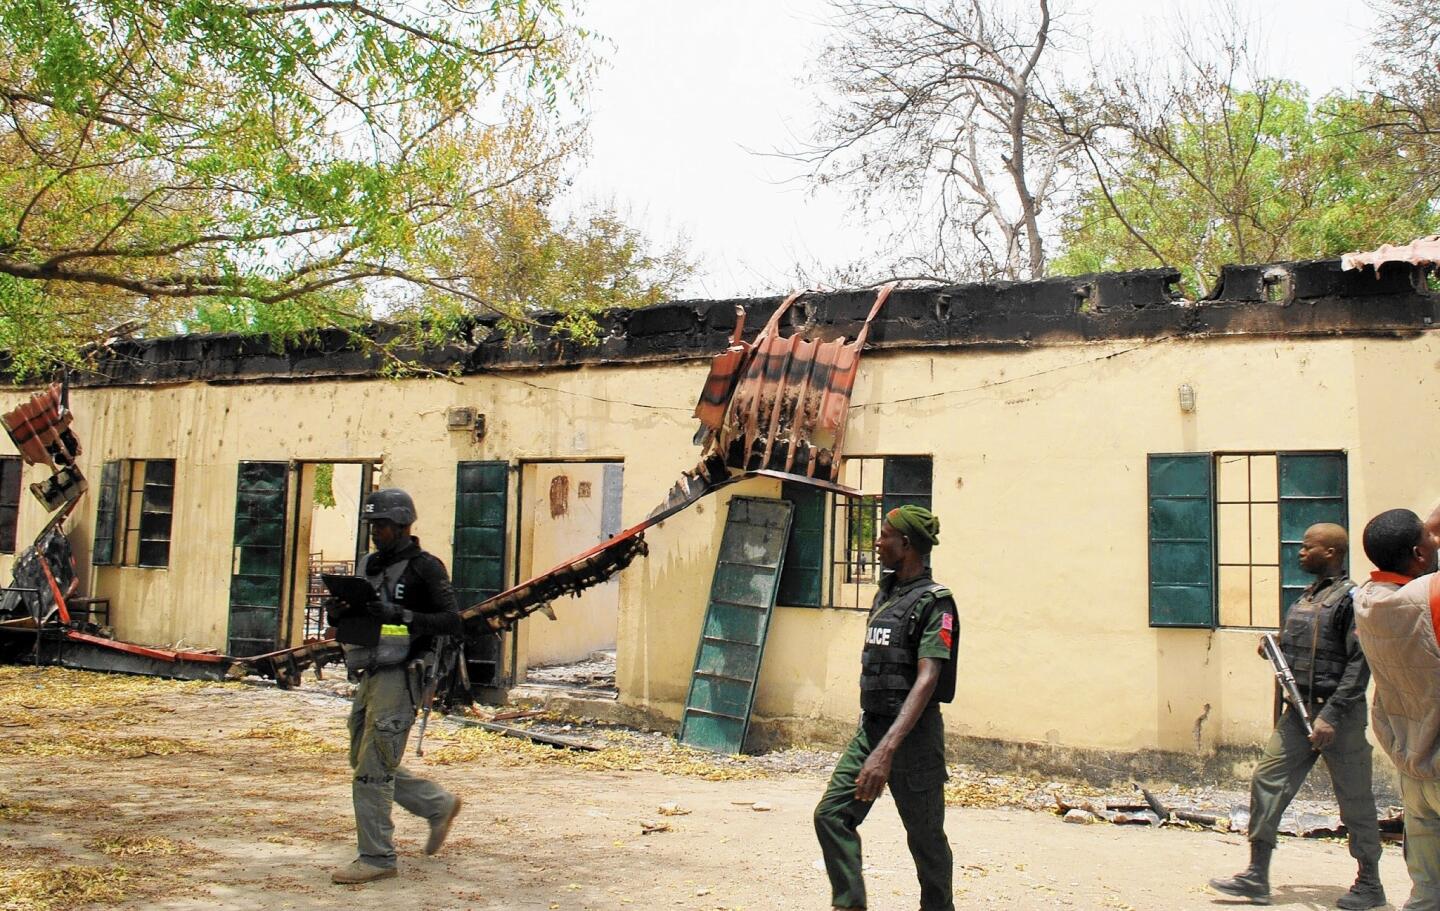 Police walk past the school in Chibok, Nigeria, where Boko Haram militants abducted more than 300 girls.